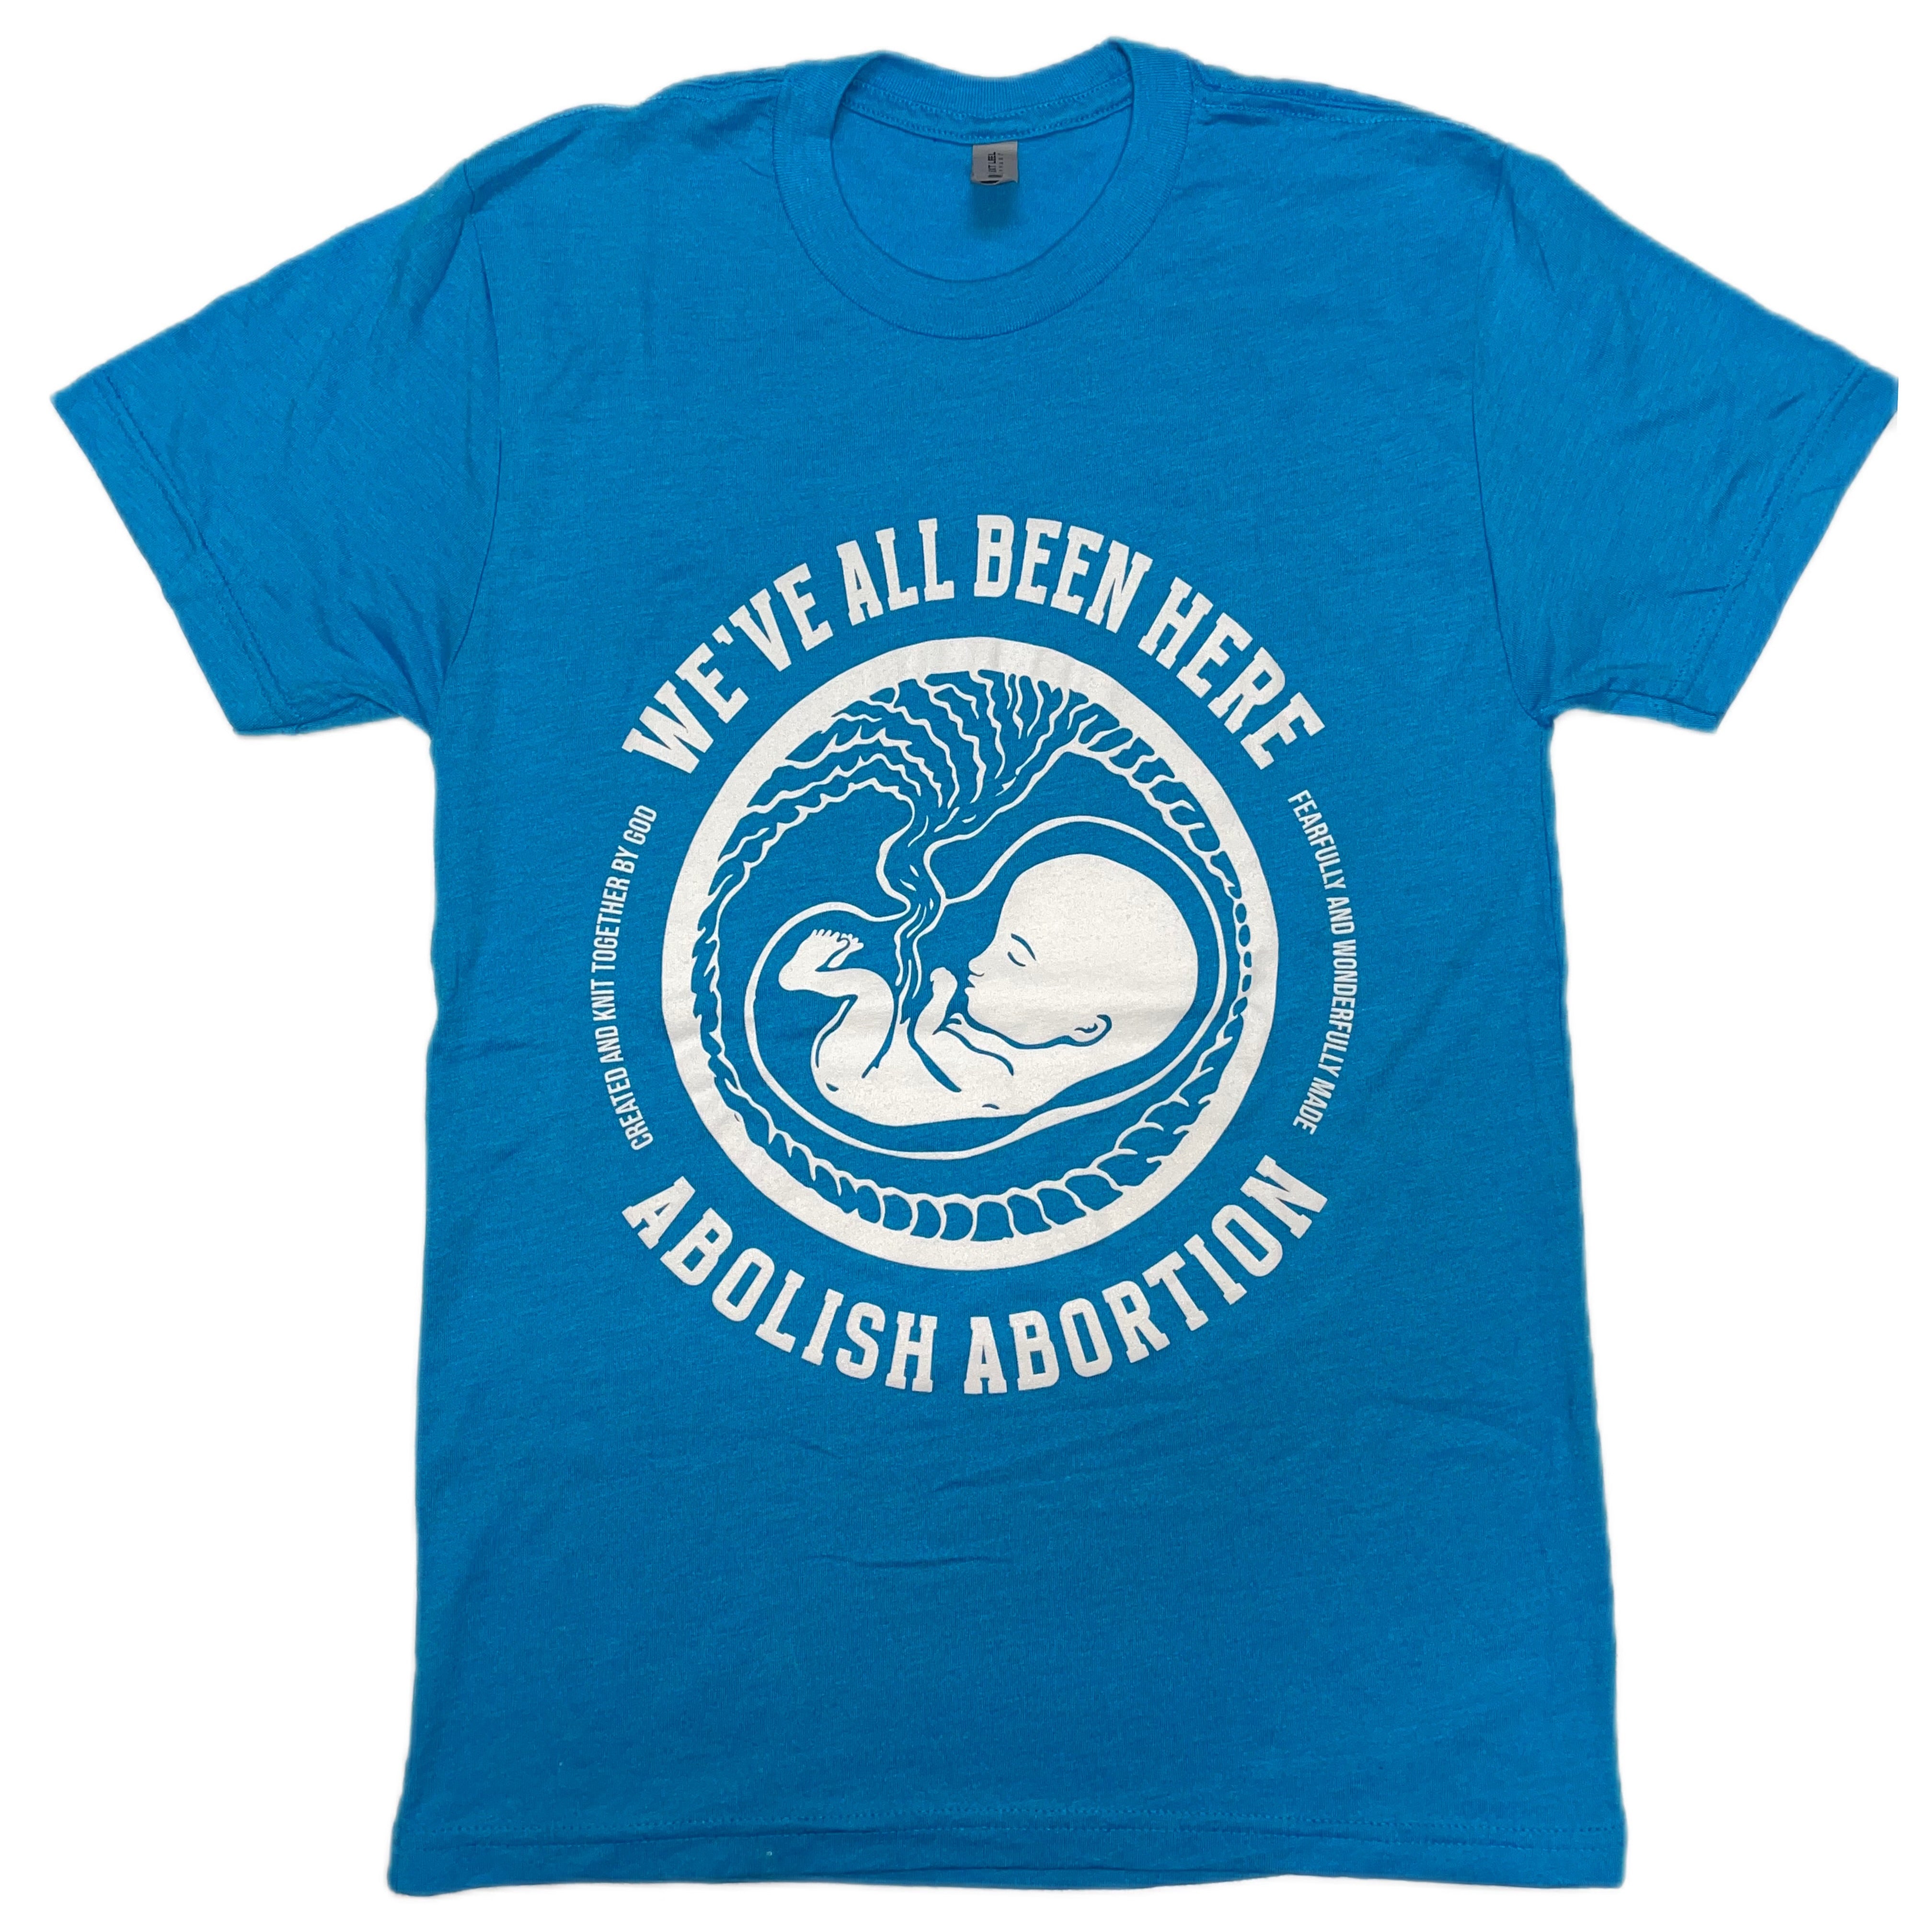 We've All Been Here T-Shirt (Unisex) - Turquoise & Dropcard Bundle